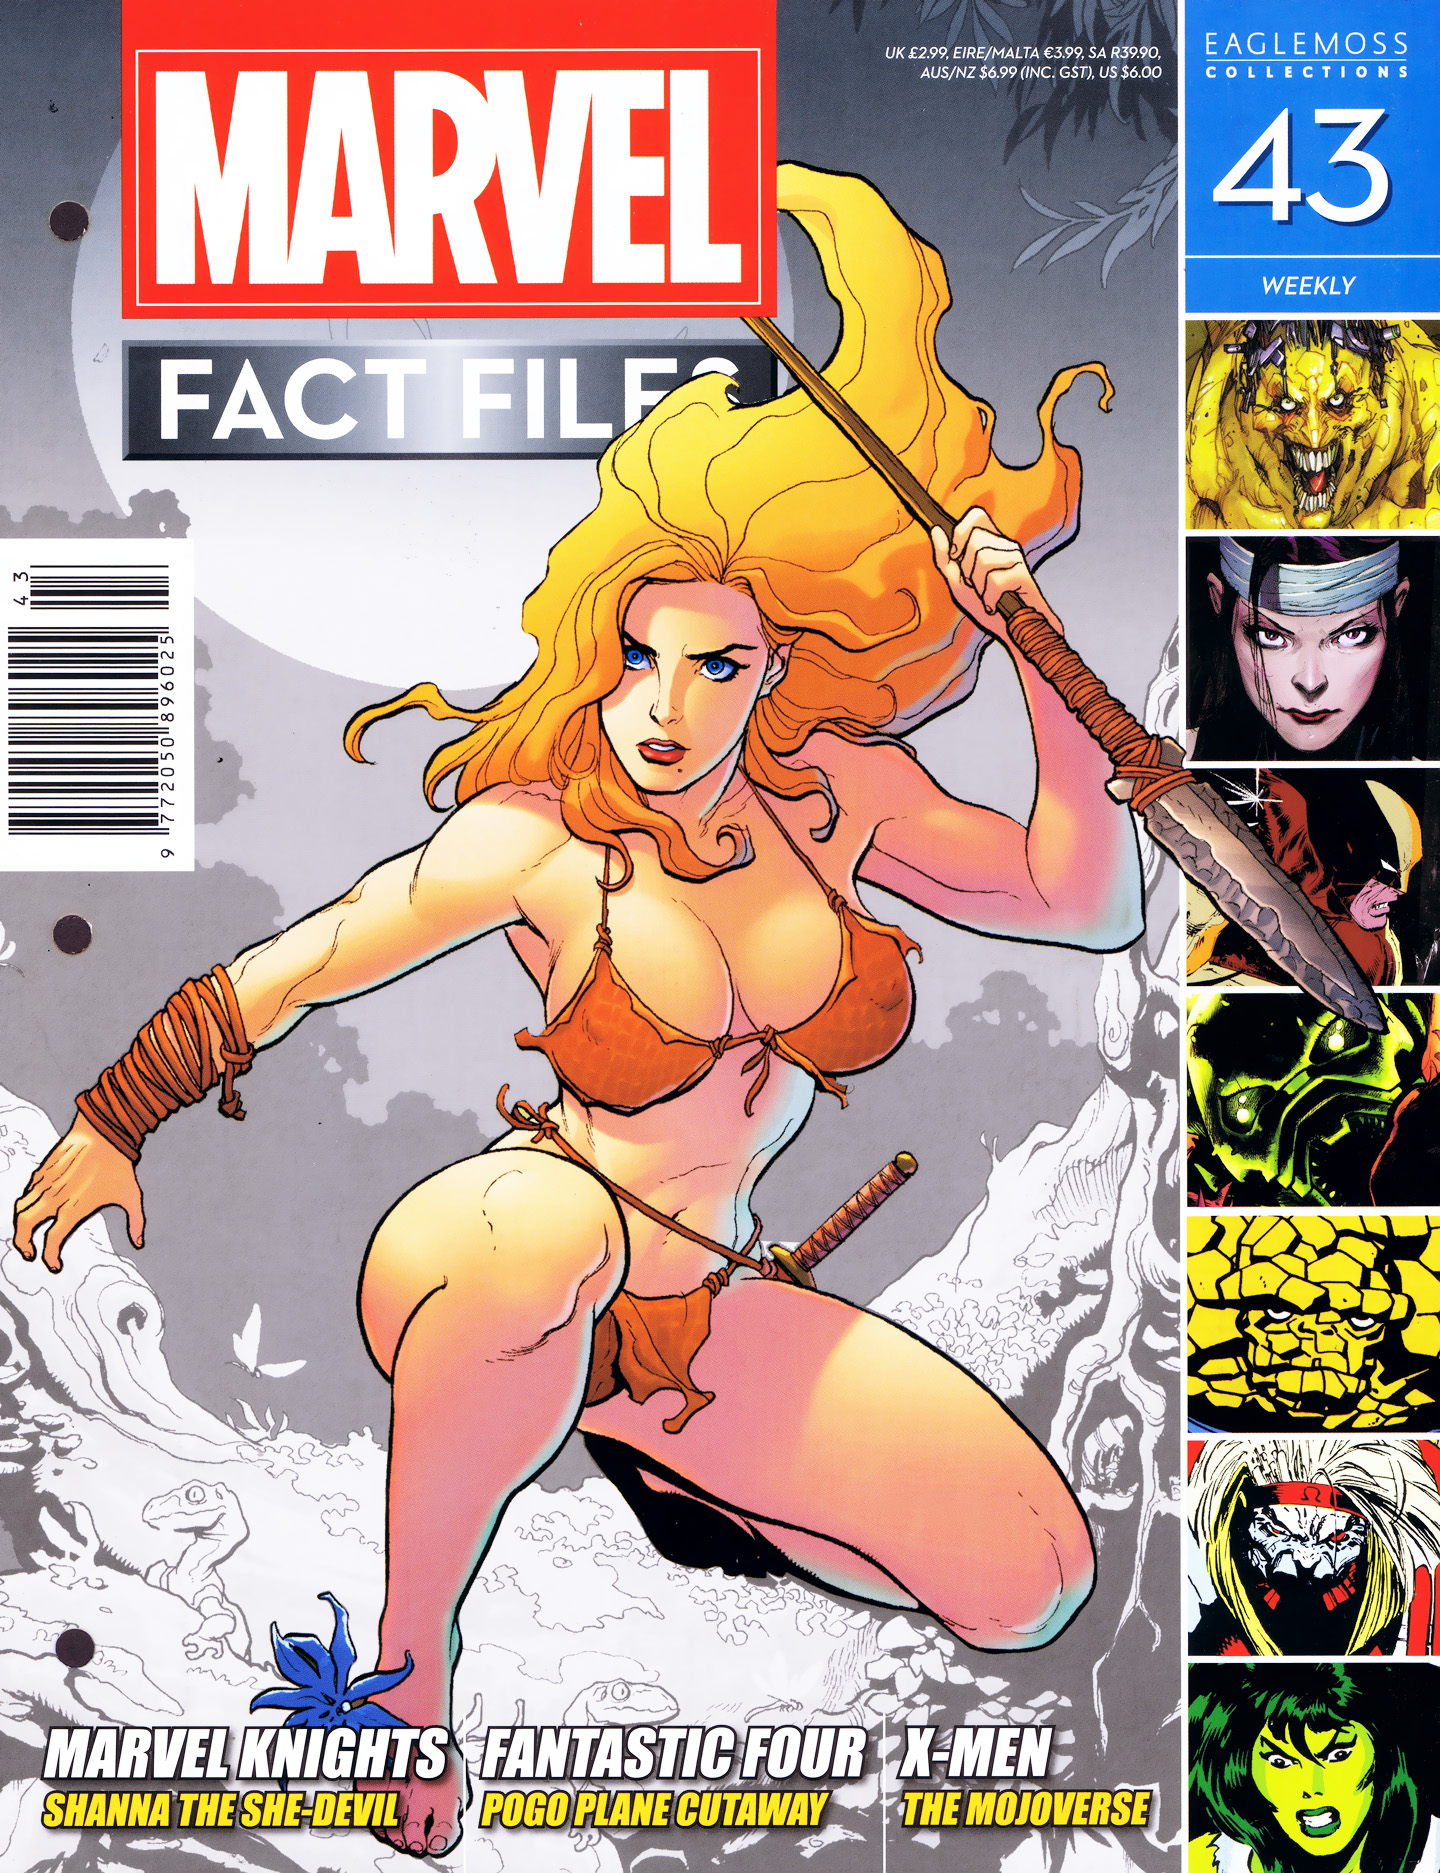 Read online Marvel Fact Files comic -  Issue #43 - 1